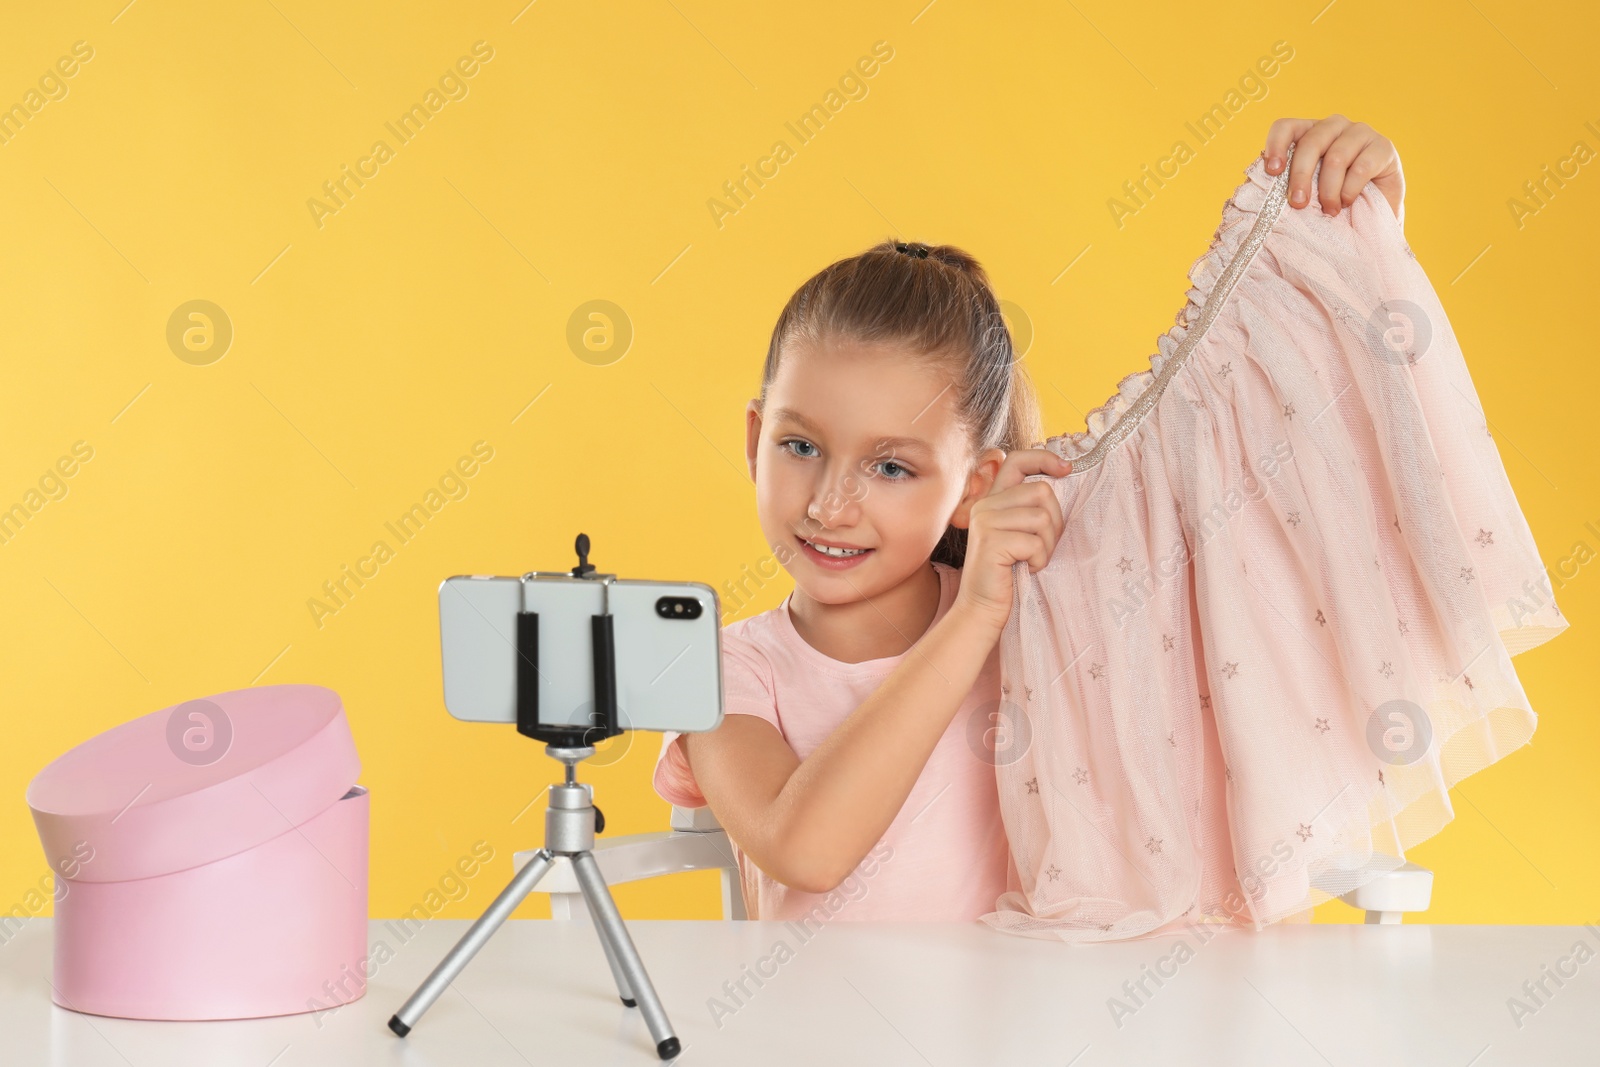 Photo of Cute little blogger with skirt recording video at table on yellow background